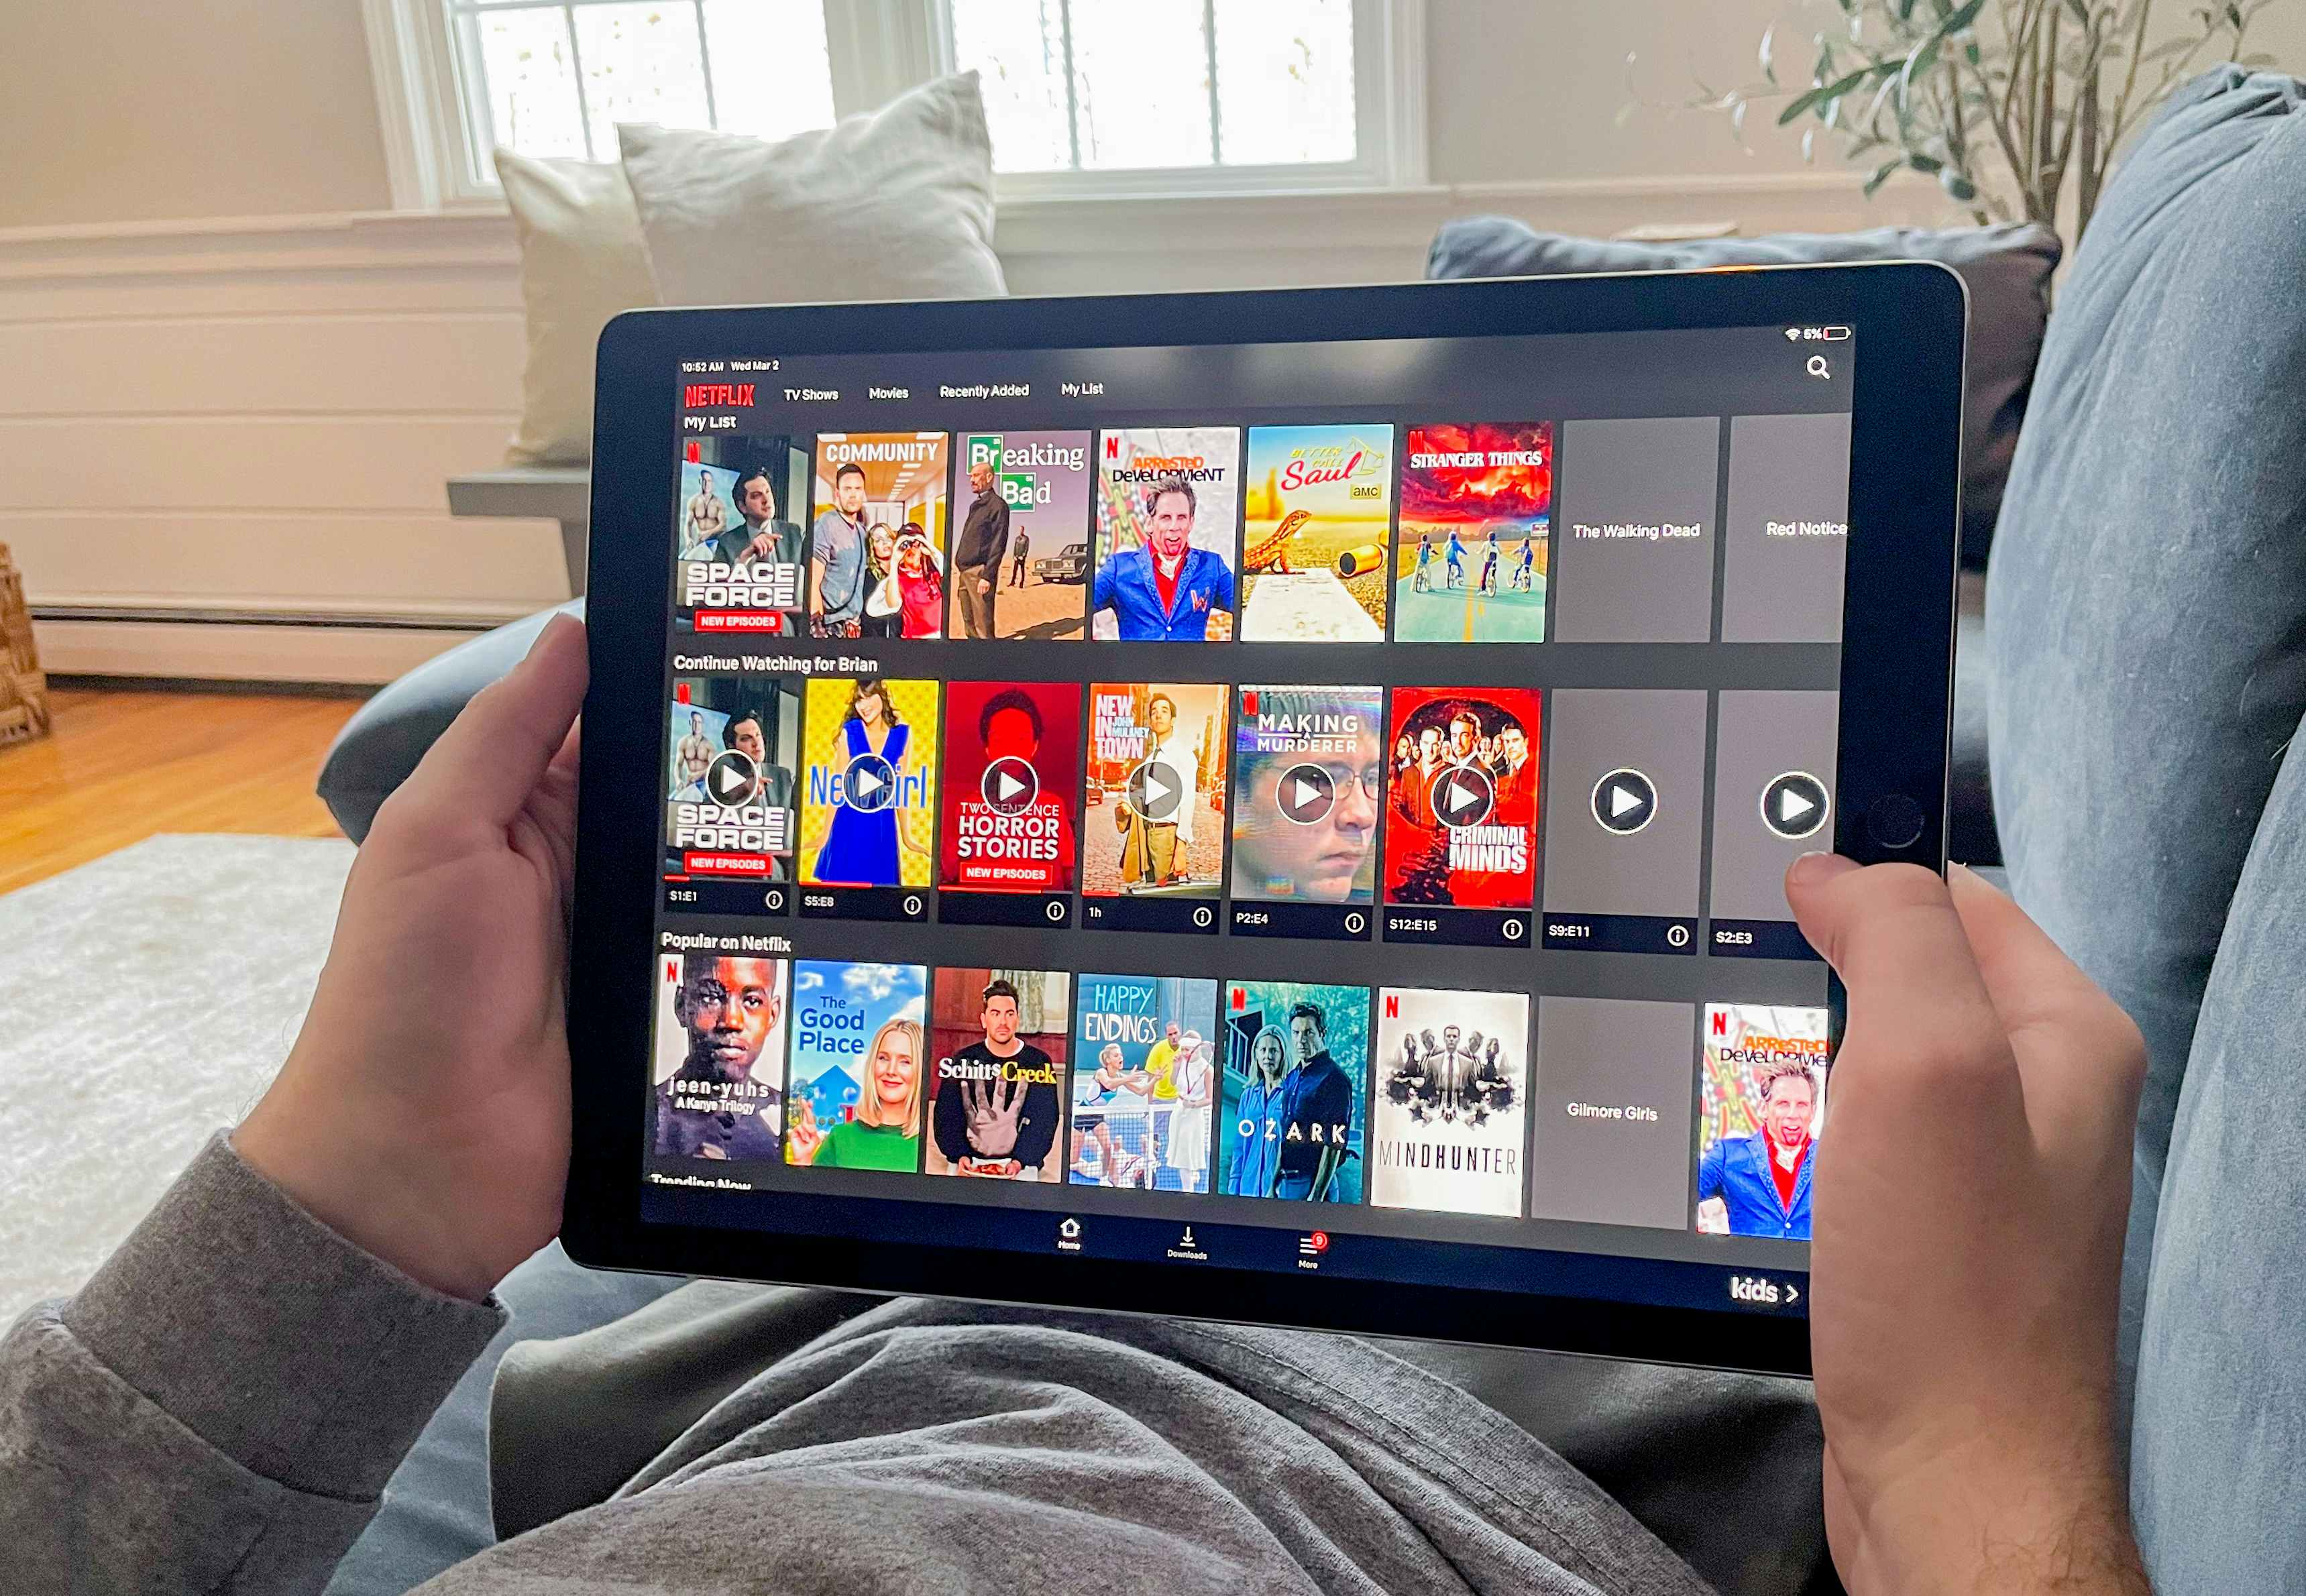 man laying on couch watching netflix through the app on his tablet